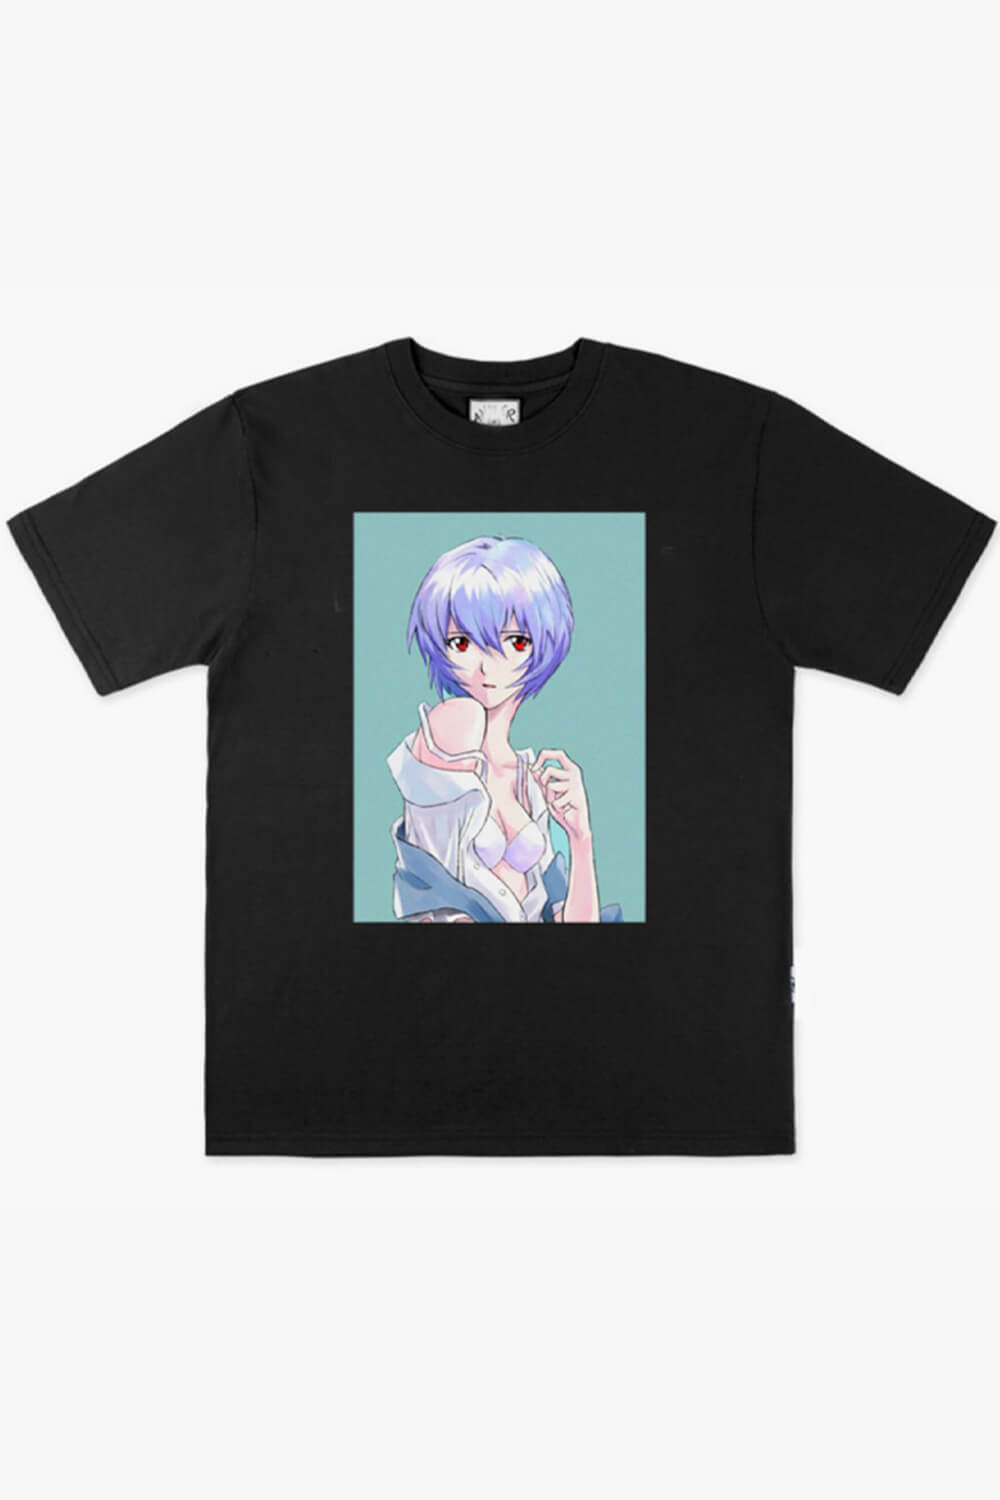 You Are Awesome - Neon Genesis Evangelion : Rei Ayanami New Premium Design  Anime Series Poster 02 (12 inch x 18 inch)